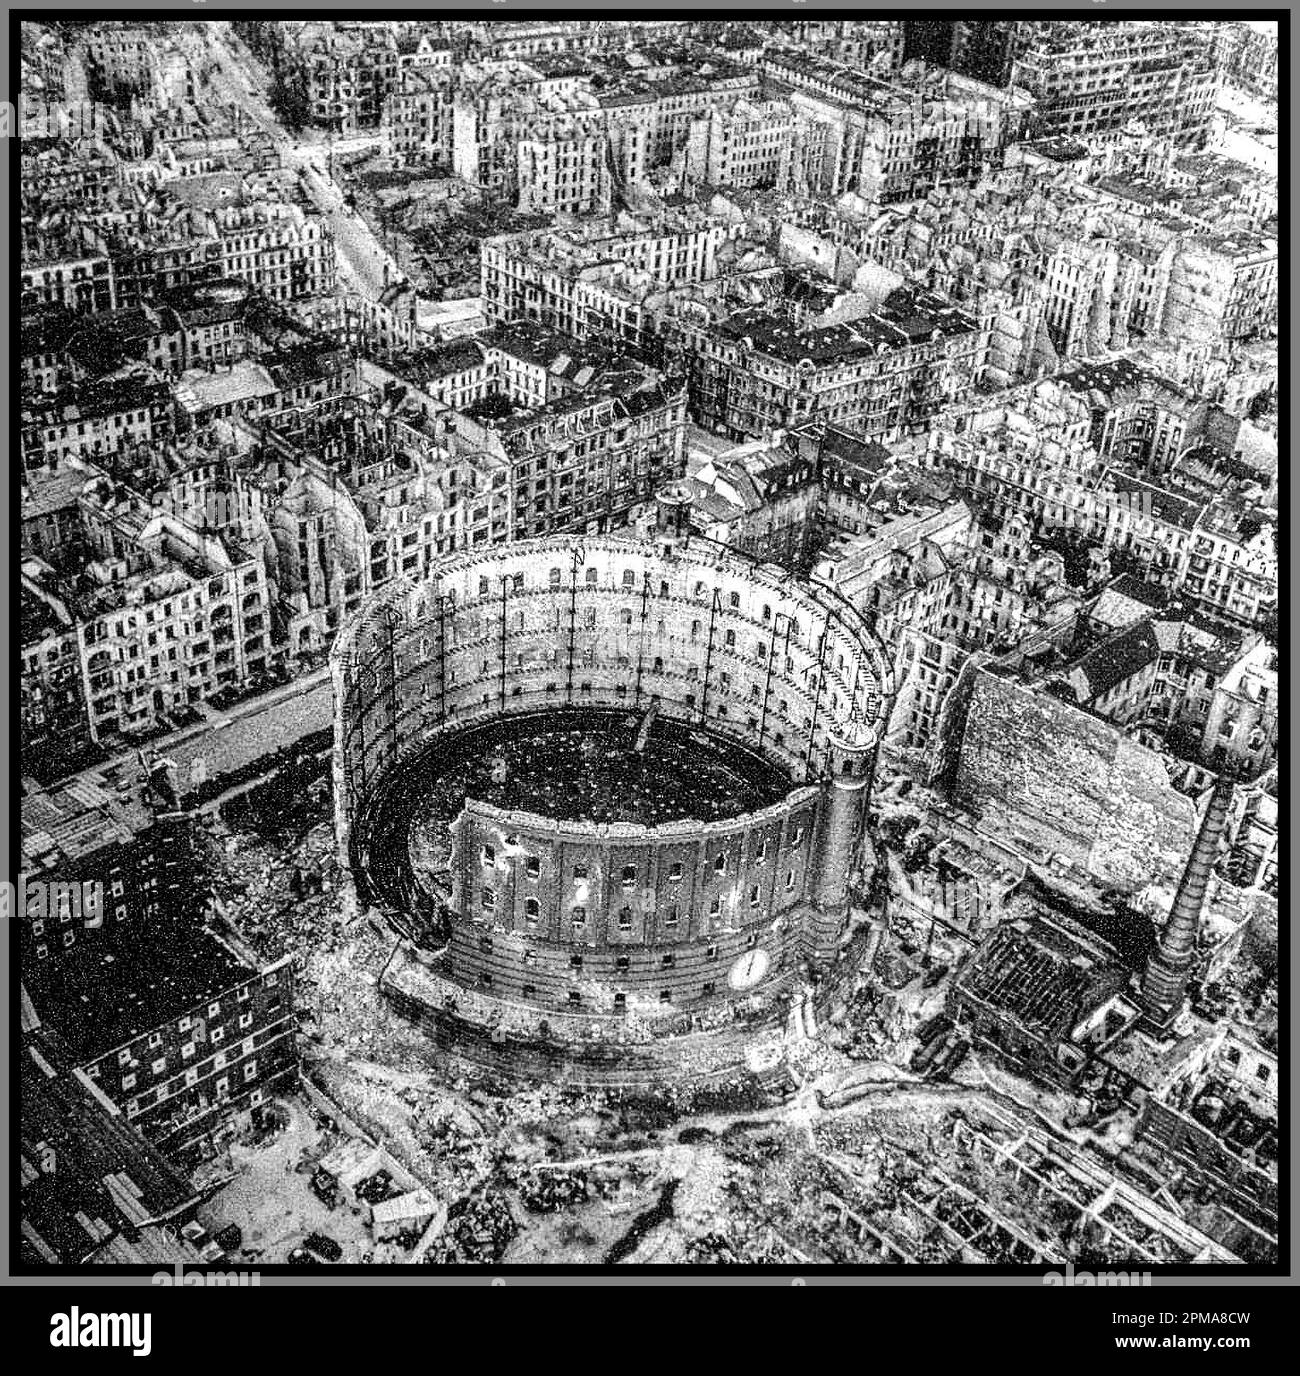 Bombed Berlin Germany 1945 at the end of World War II. Devasted by Allied bombing and continuous Stock Photo